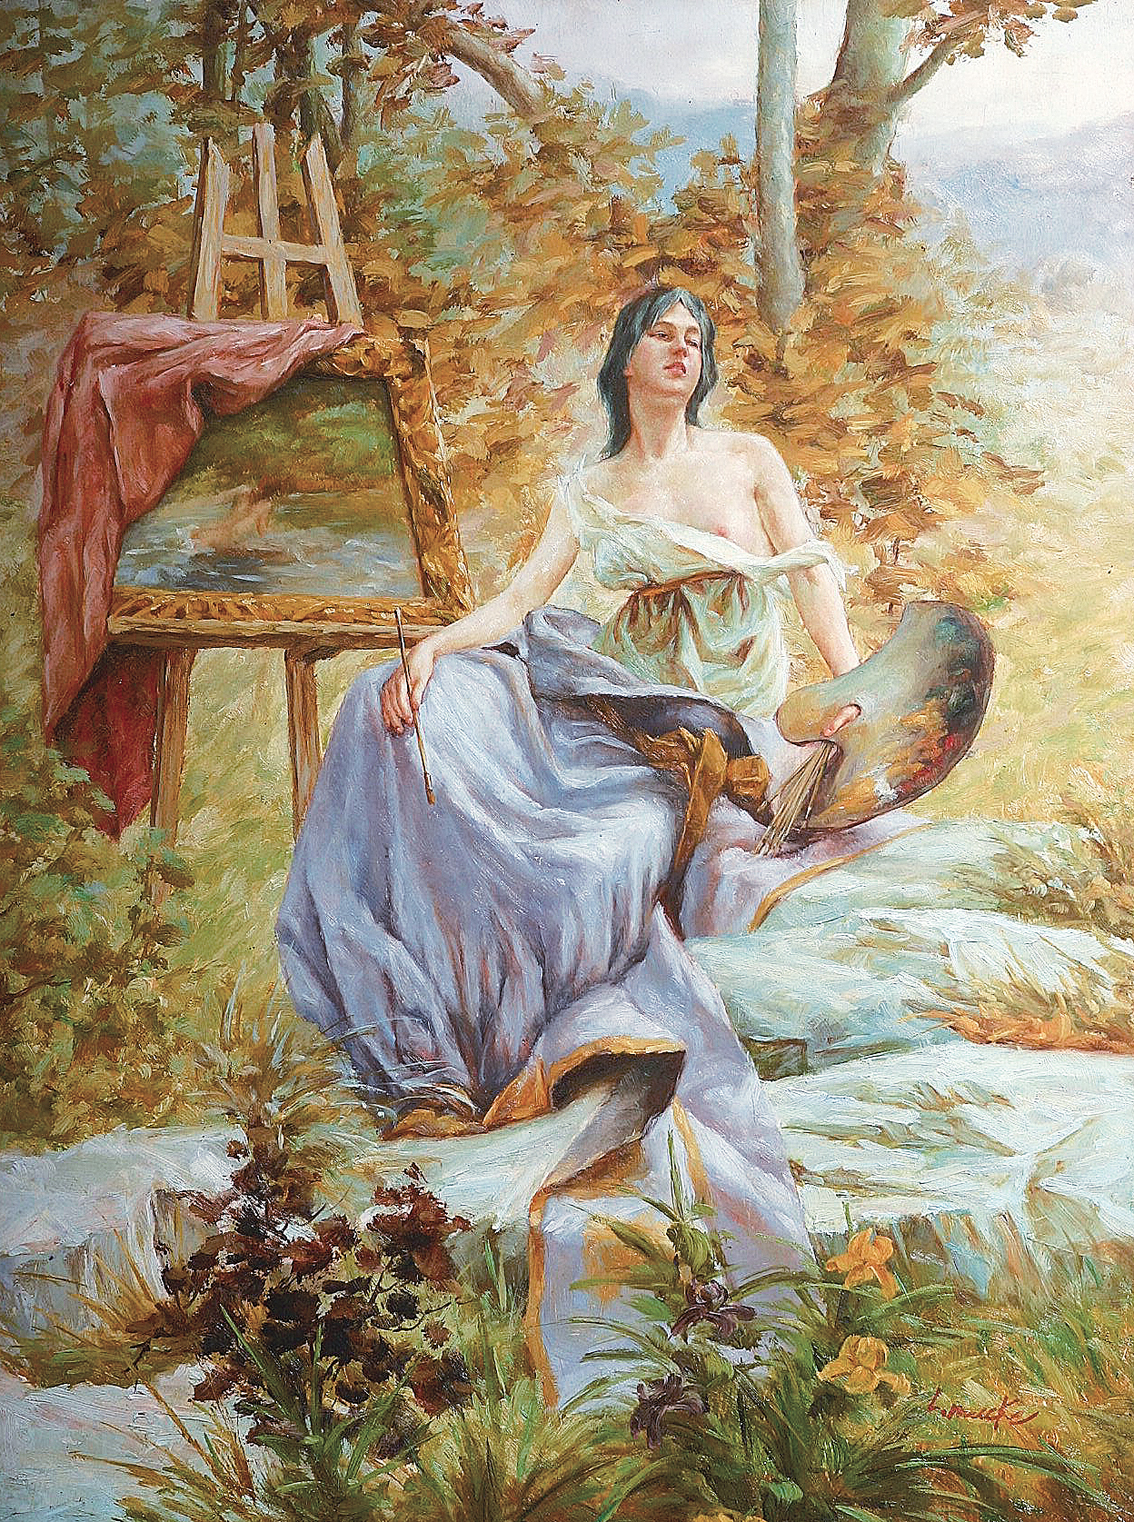 "A beautiful female painter in a forest landscape"